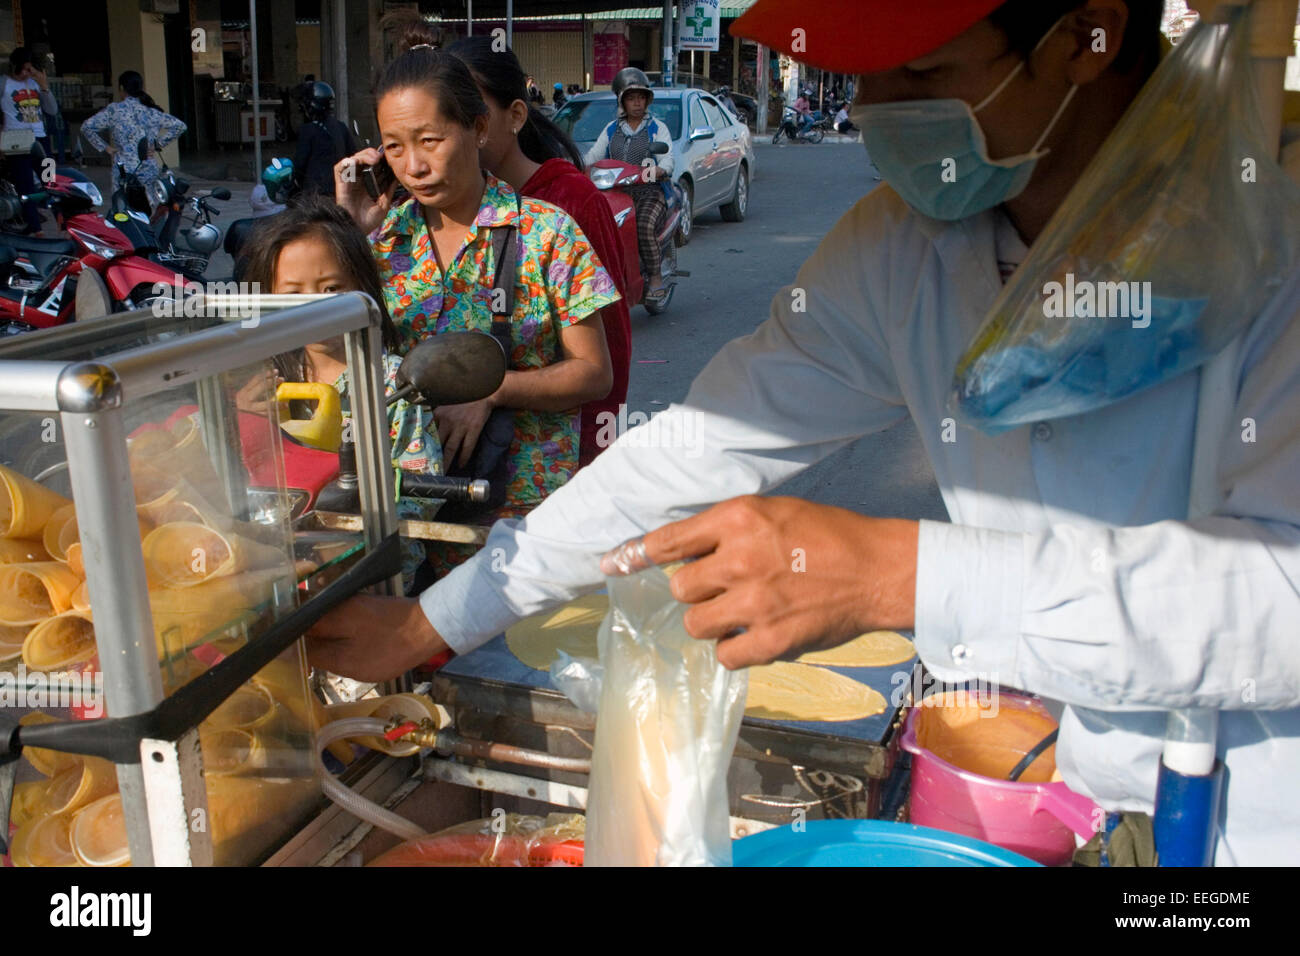 A man is making roti, a popular street food in southeast Asia, on a mobile food cart on a city street in Kampong Cham, Cambodia. Stock Photo